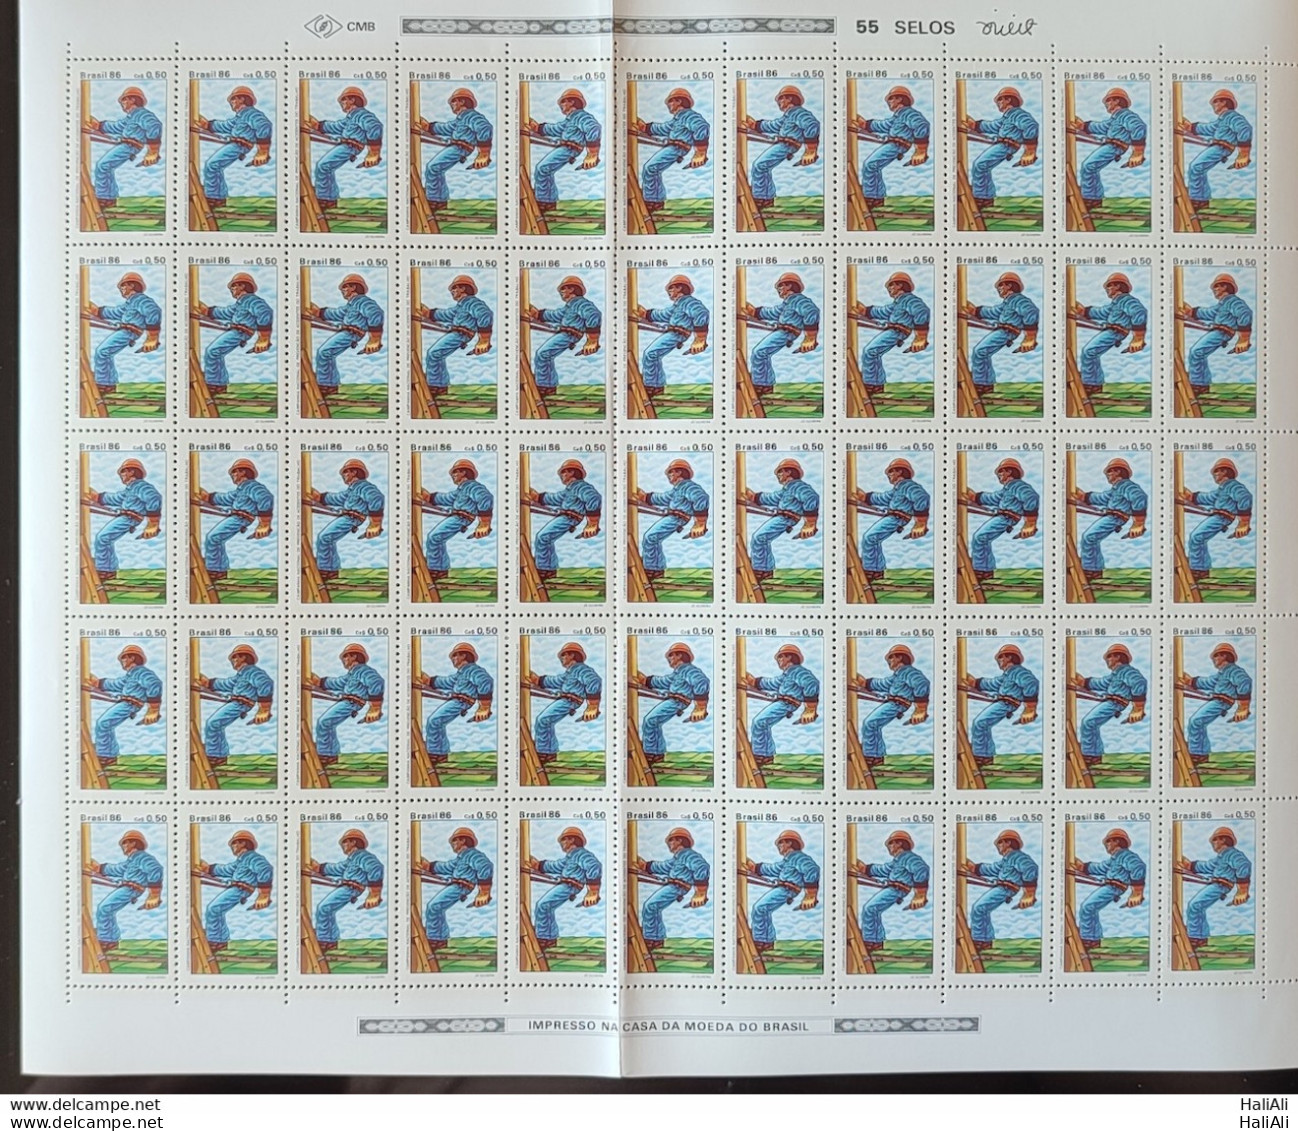 C 1516 Brazil Stamp Prevention Of Work Accidents Health Safety 1986 Sheet.jpg - Unused Stamps